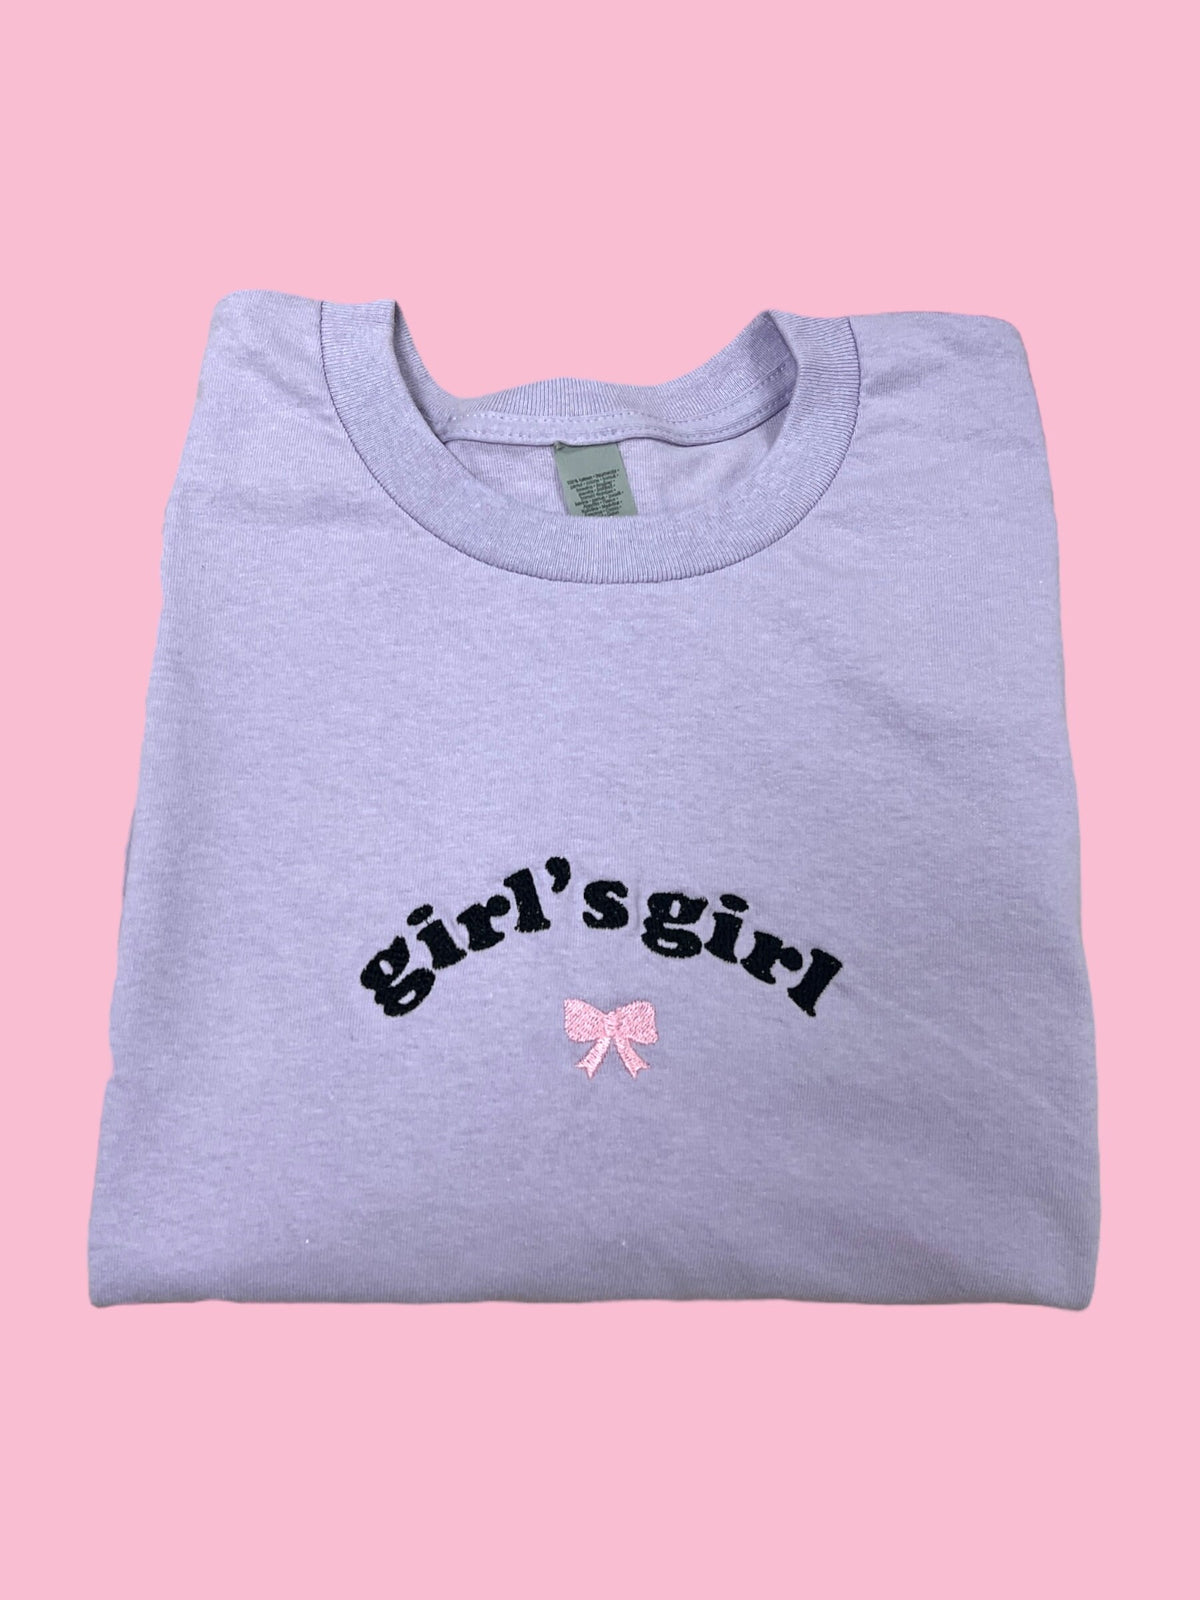 a t - shirt with the words girl&#39;s girl on it